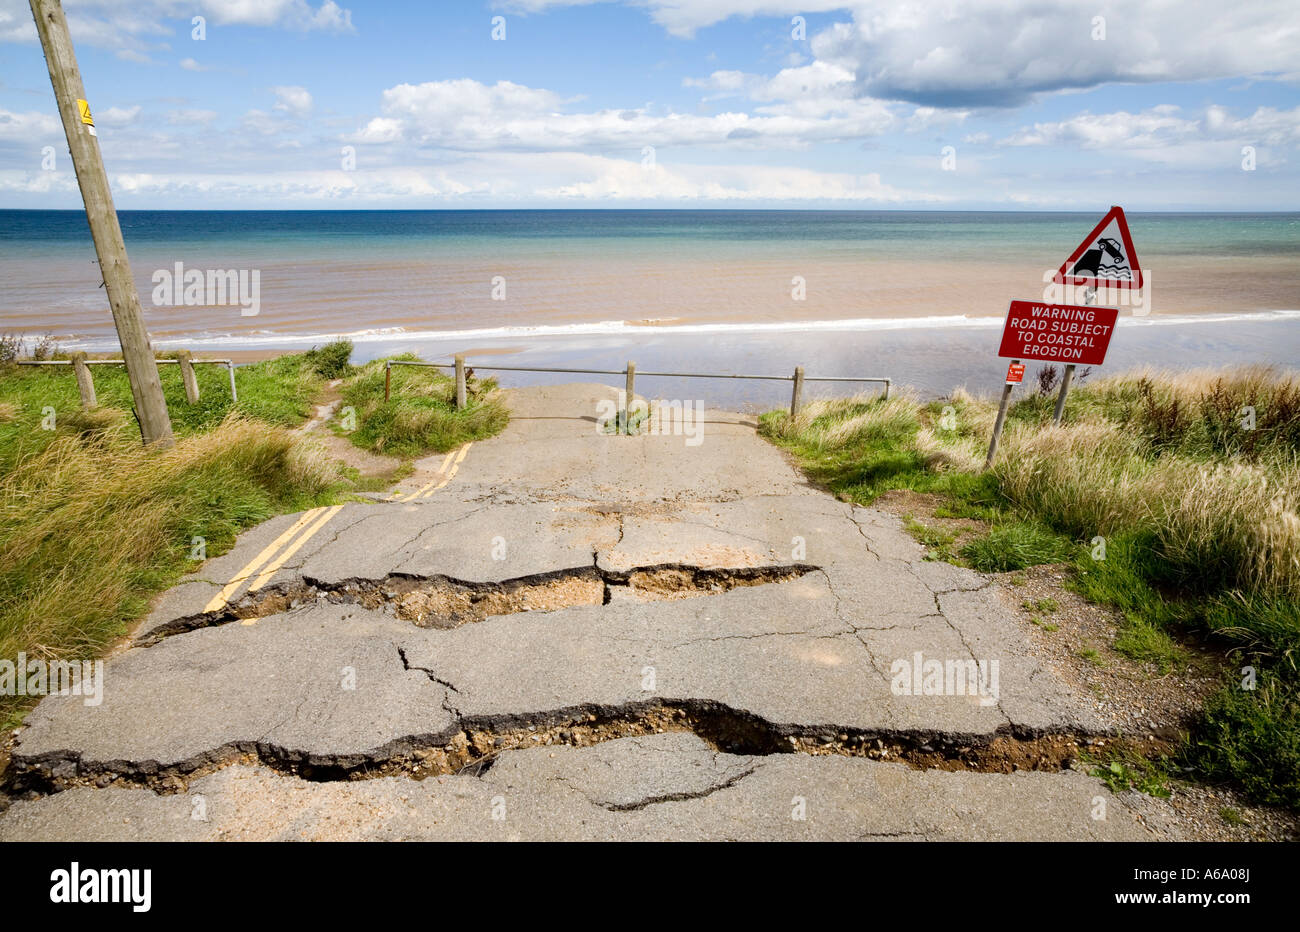 Seaside Road and warning signs in Aldbrough, Yorkshire, UK. Erosion along the North Sea coastline. Stock Photo